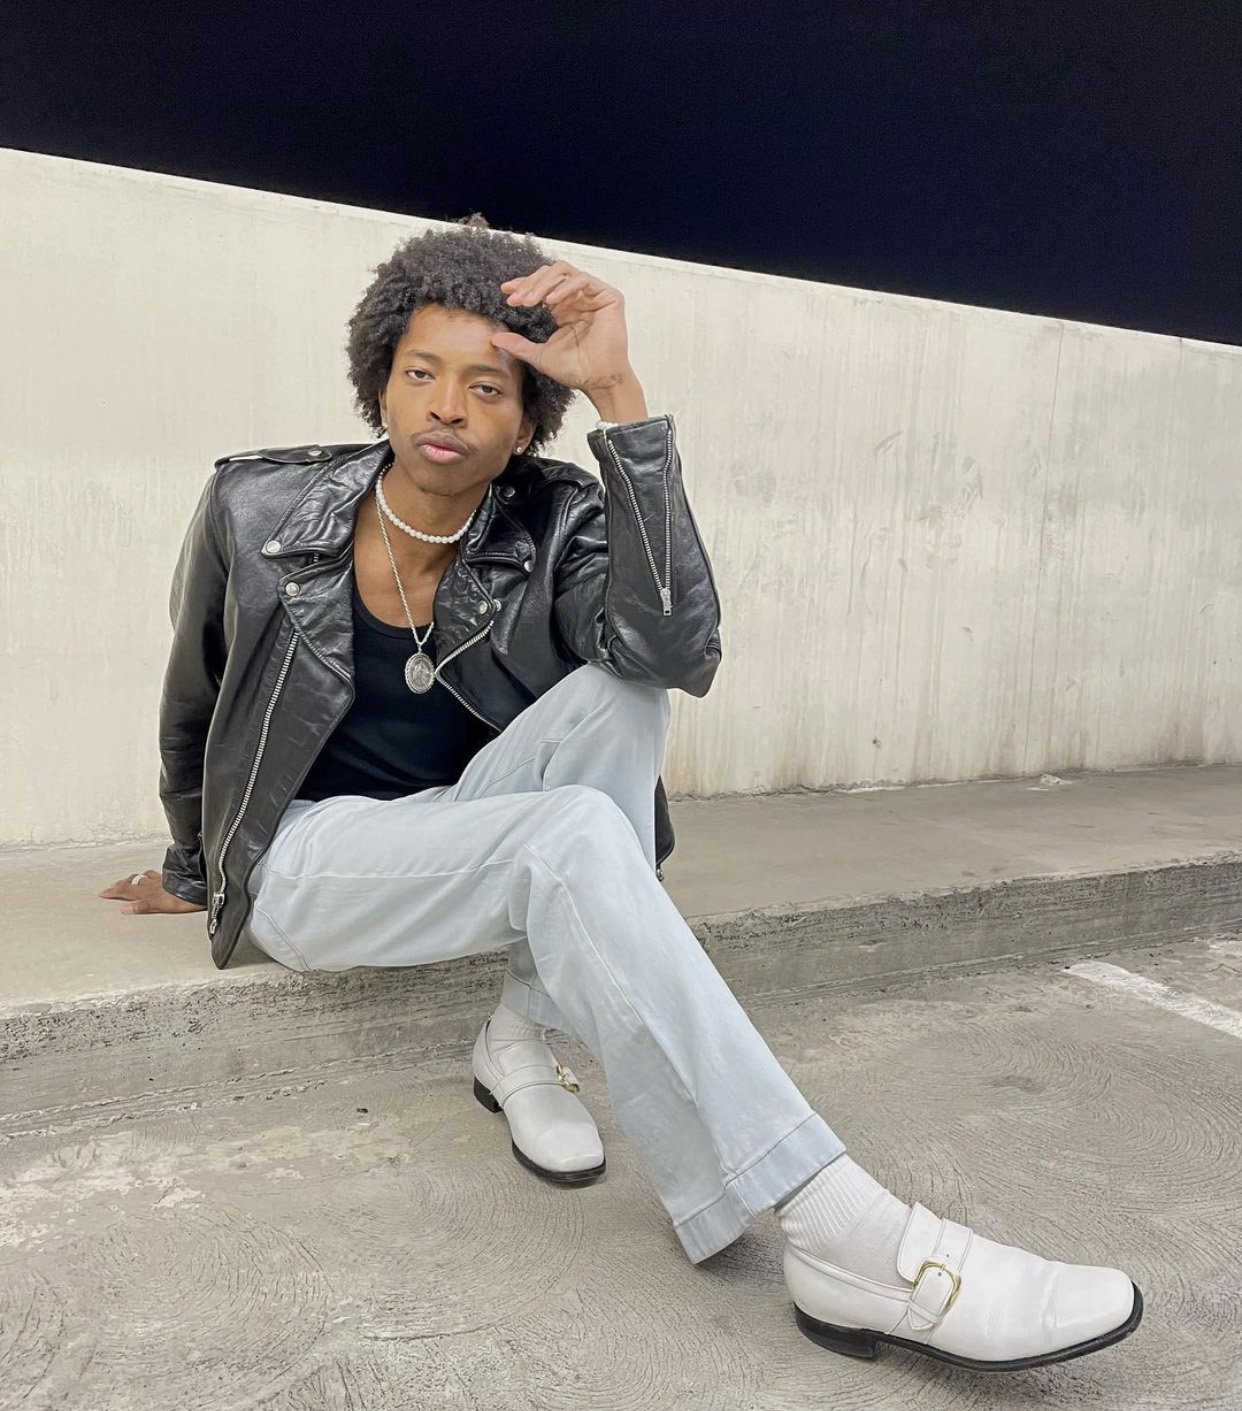 person sits on floor of a cement parking structure posed towards the camera. They are wearing a black leather motorcycle jacket, black t-shirt, light wash denim and white loafers with socks